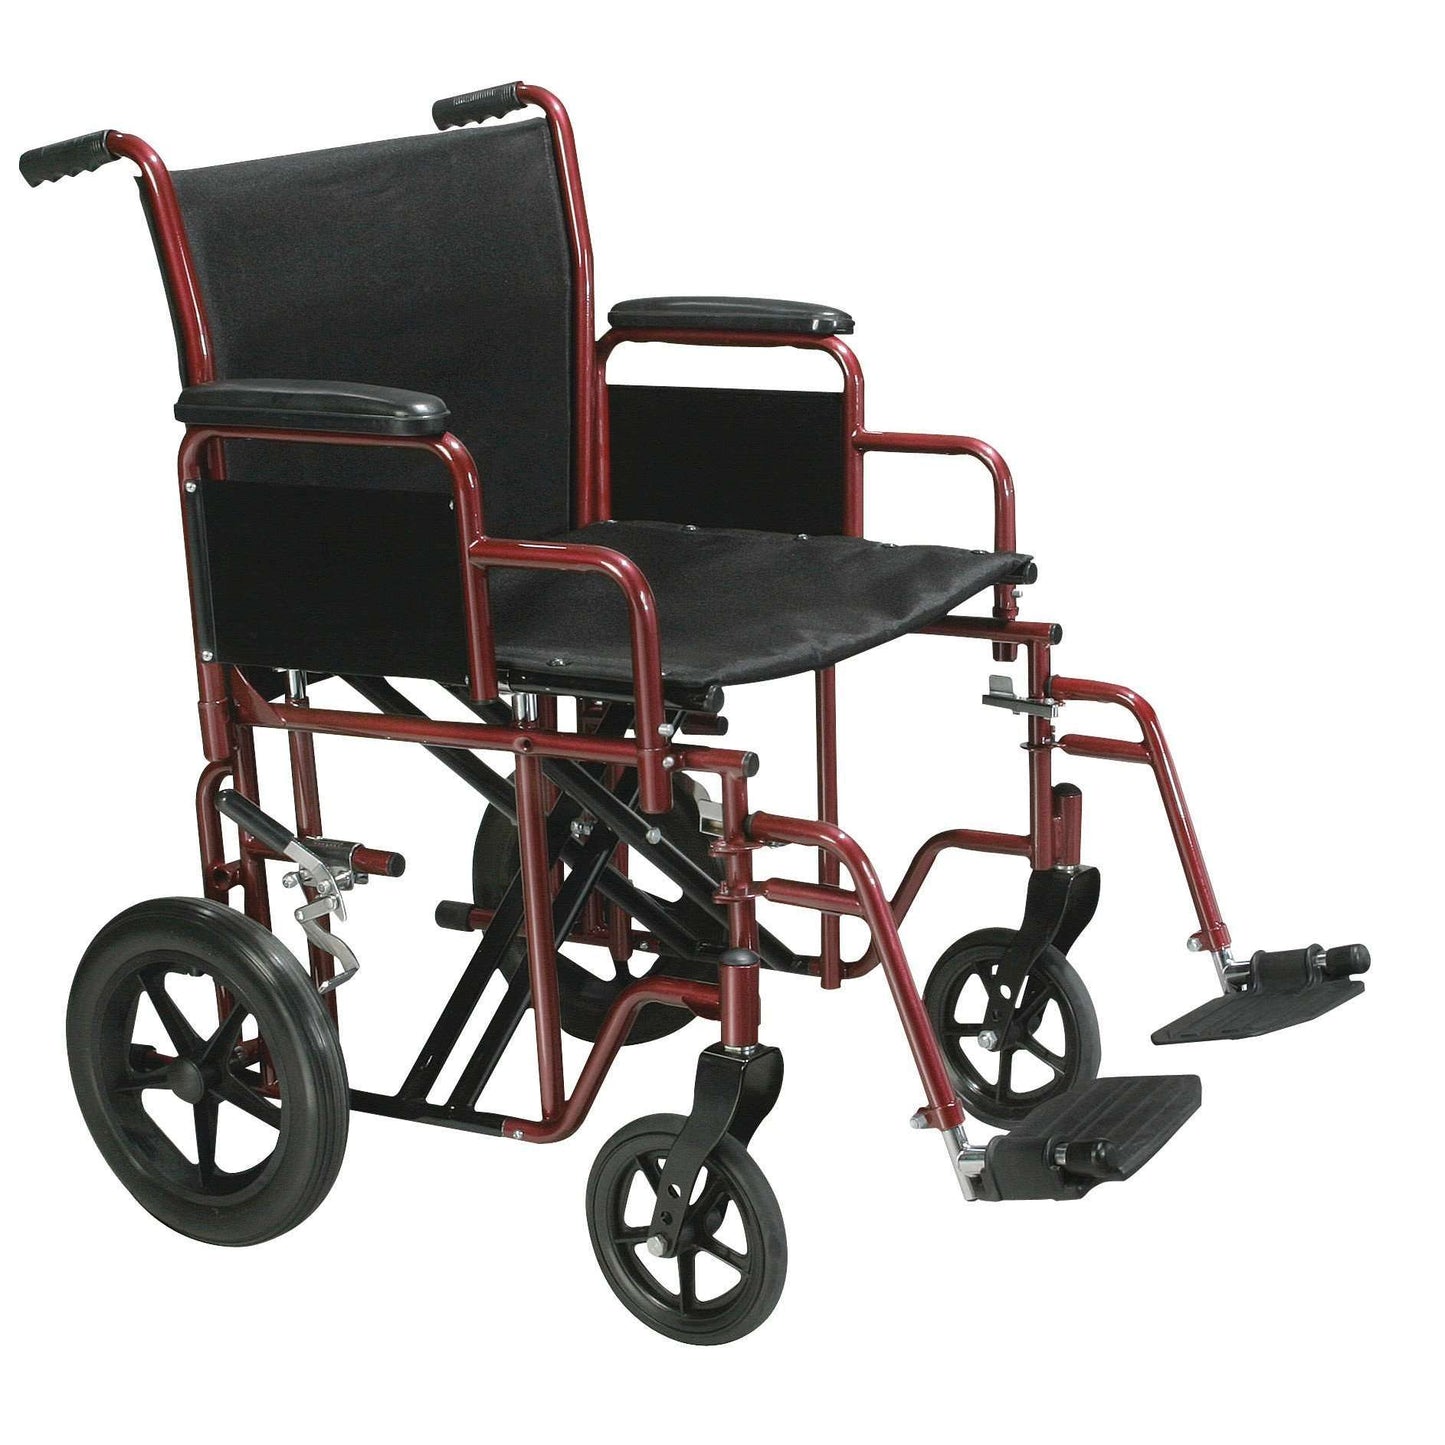 Drive btr22-r Bariatric Heavy Duty Transport Wheelchair with Swing Away Footrest, 22" Seat, Red